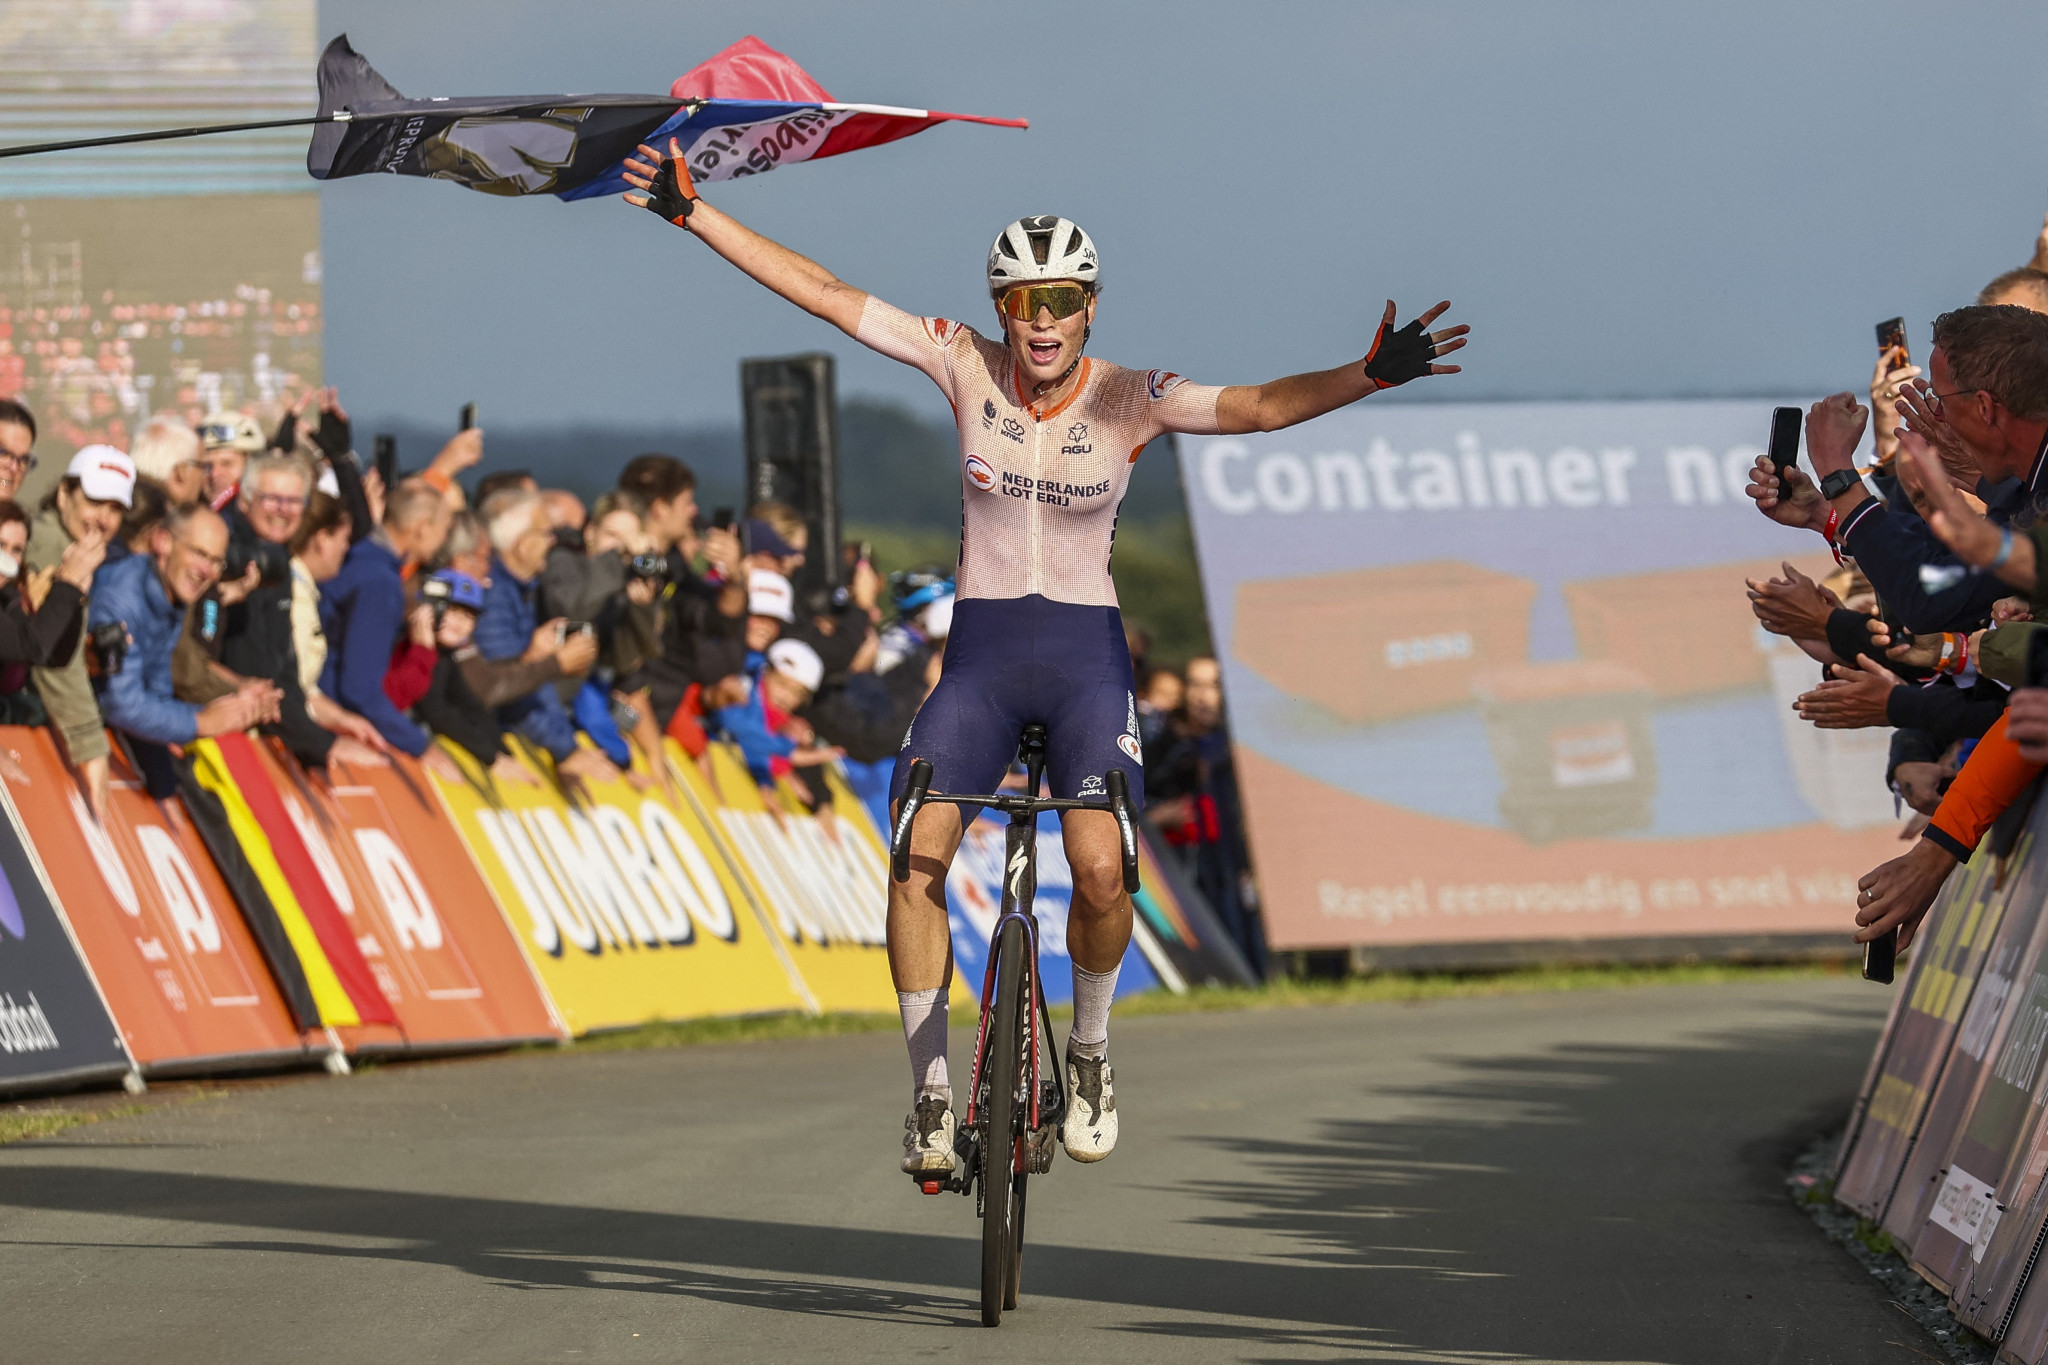 Bredewold becomes youngest winner of women’s road race at UEC European Championships